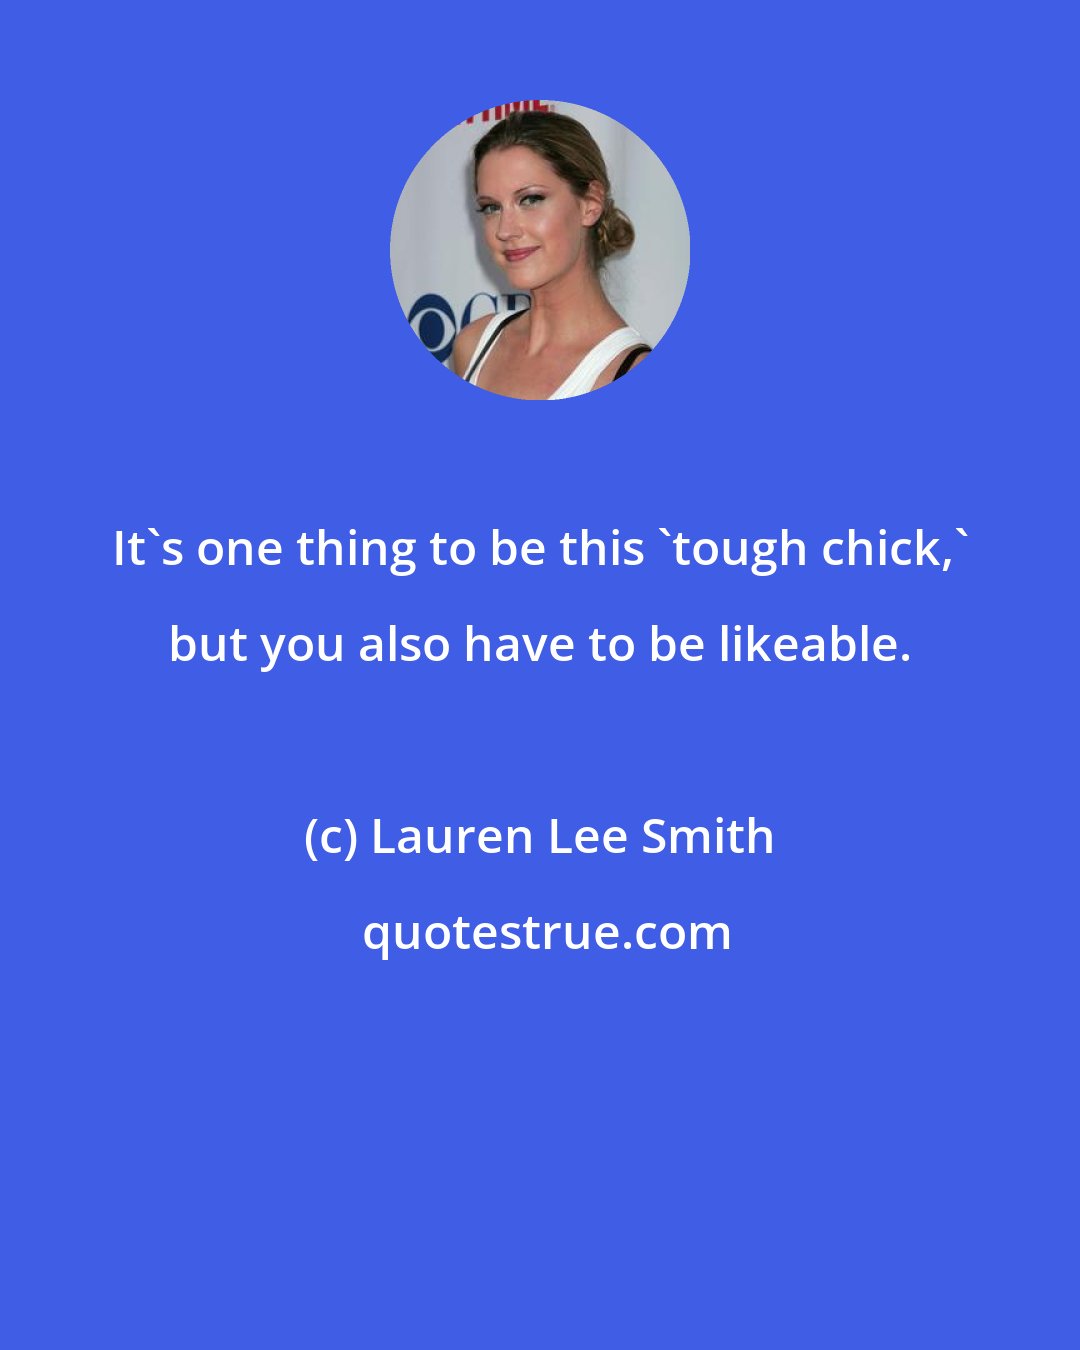 Lauren Lee Smith: It's one thing to be this 'tough chick,' but you also have to be likeable.